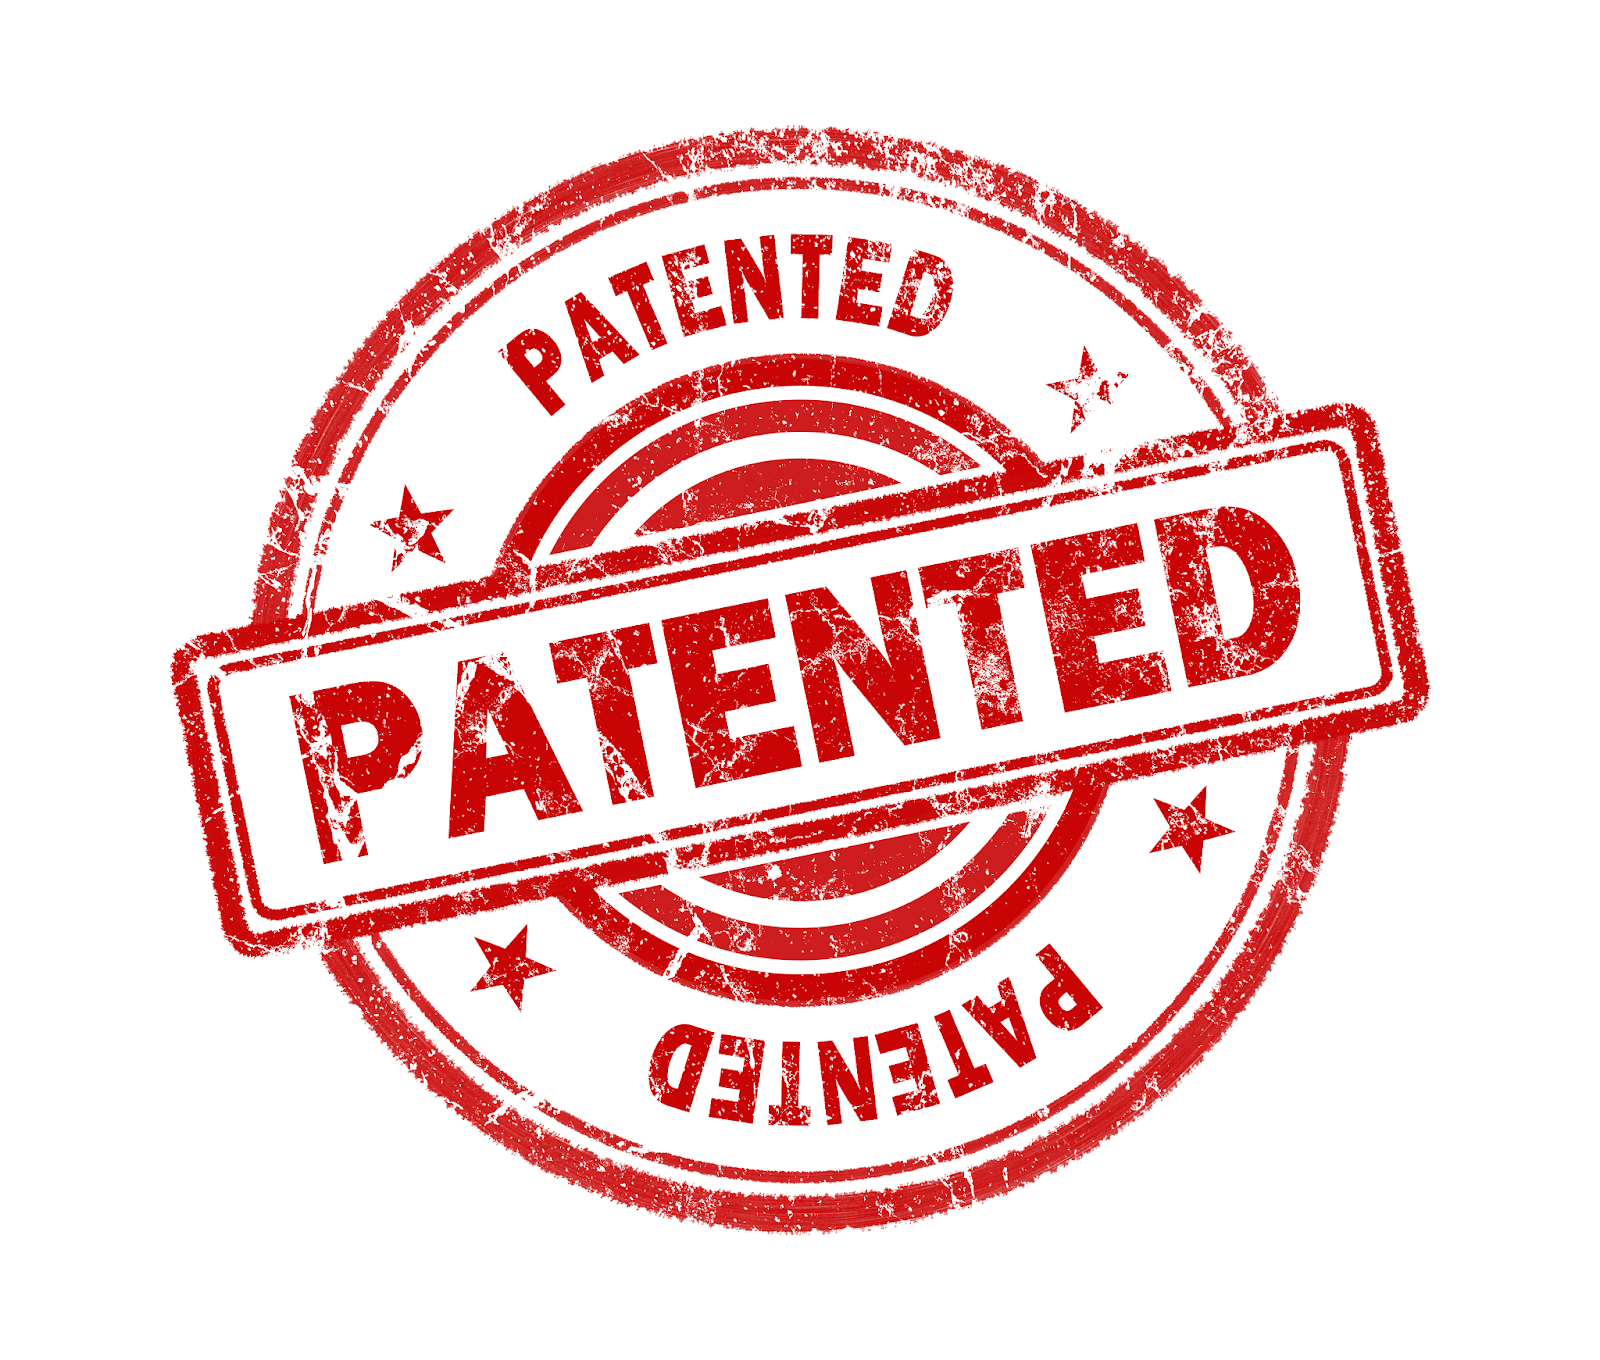 Patented product. Запатентовано. Patented без фона. Licensed registered штамп. Штамп патент пнг\.